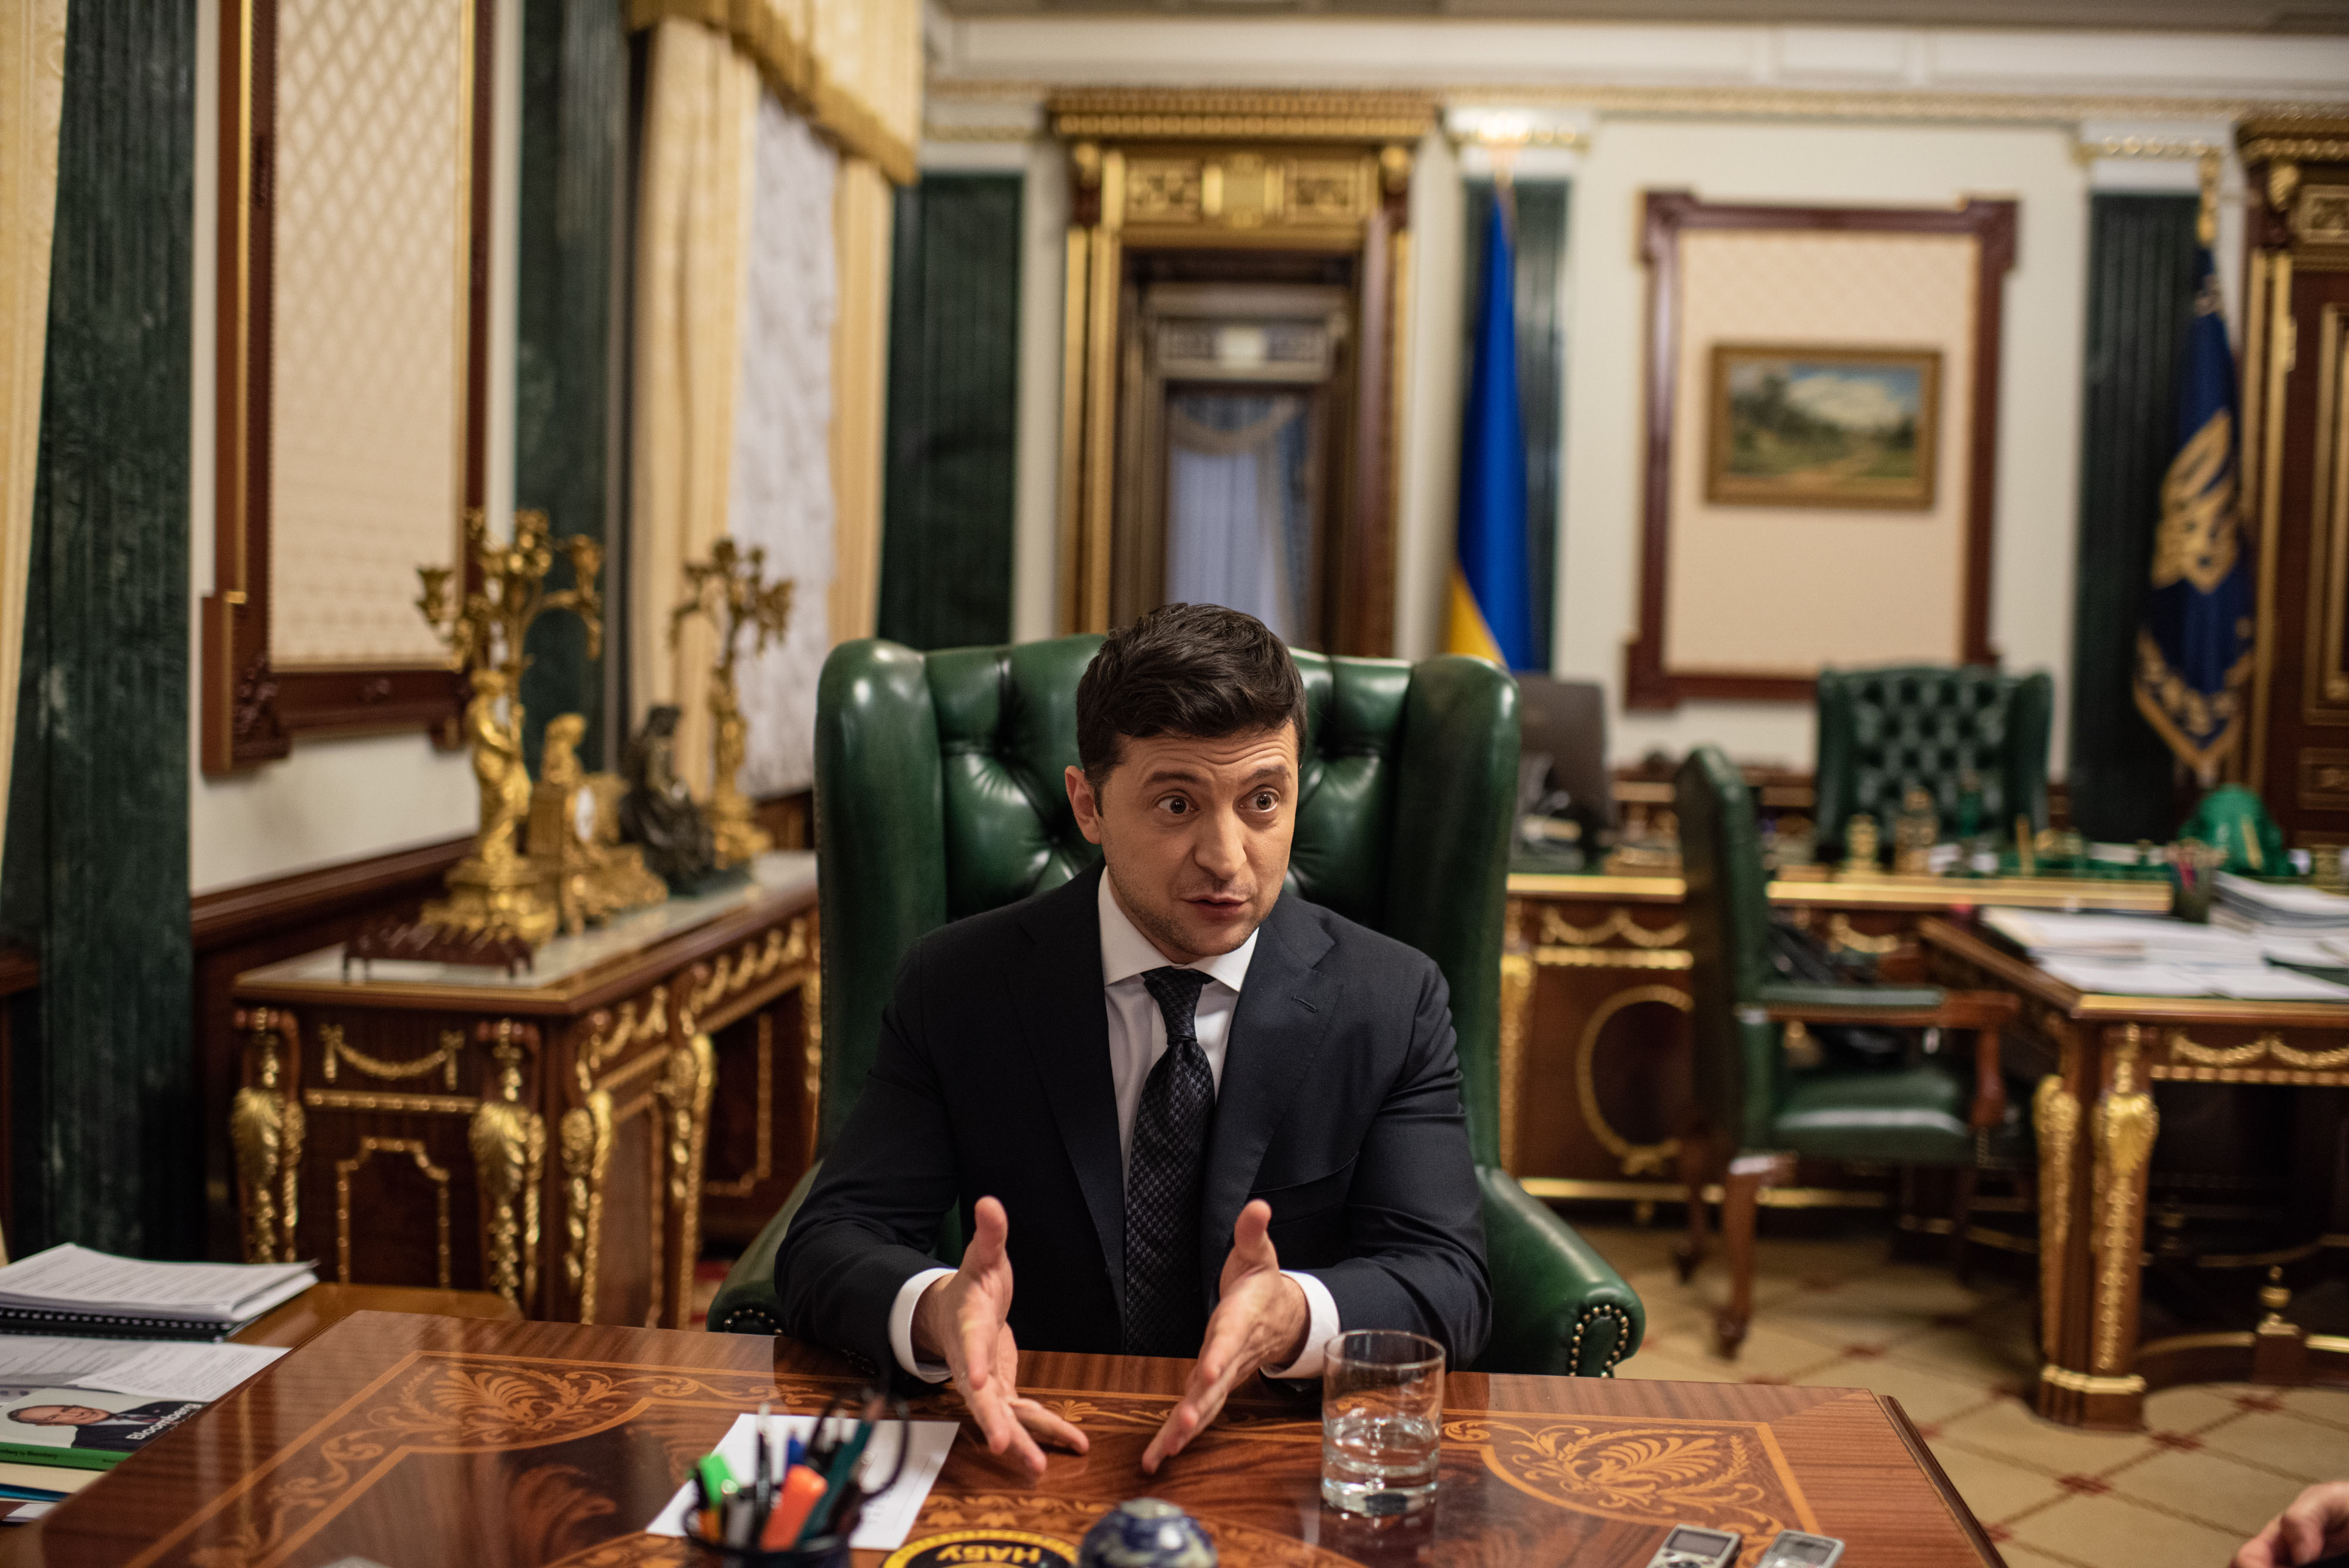 Ukraine S Leader Is Being Broken By System He Vowed To Crush Bloomberg